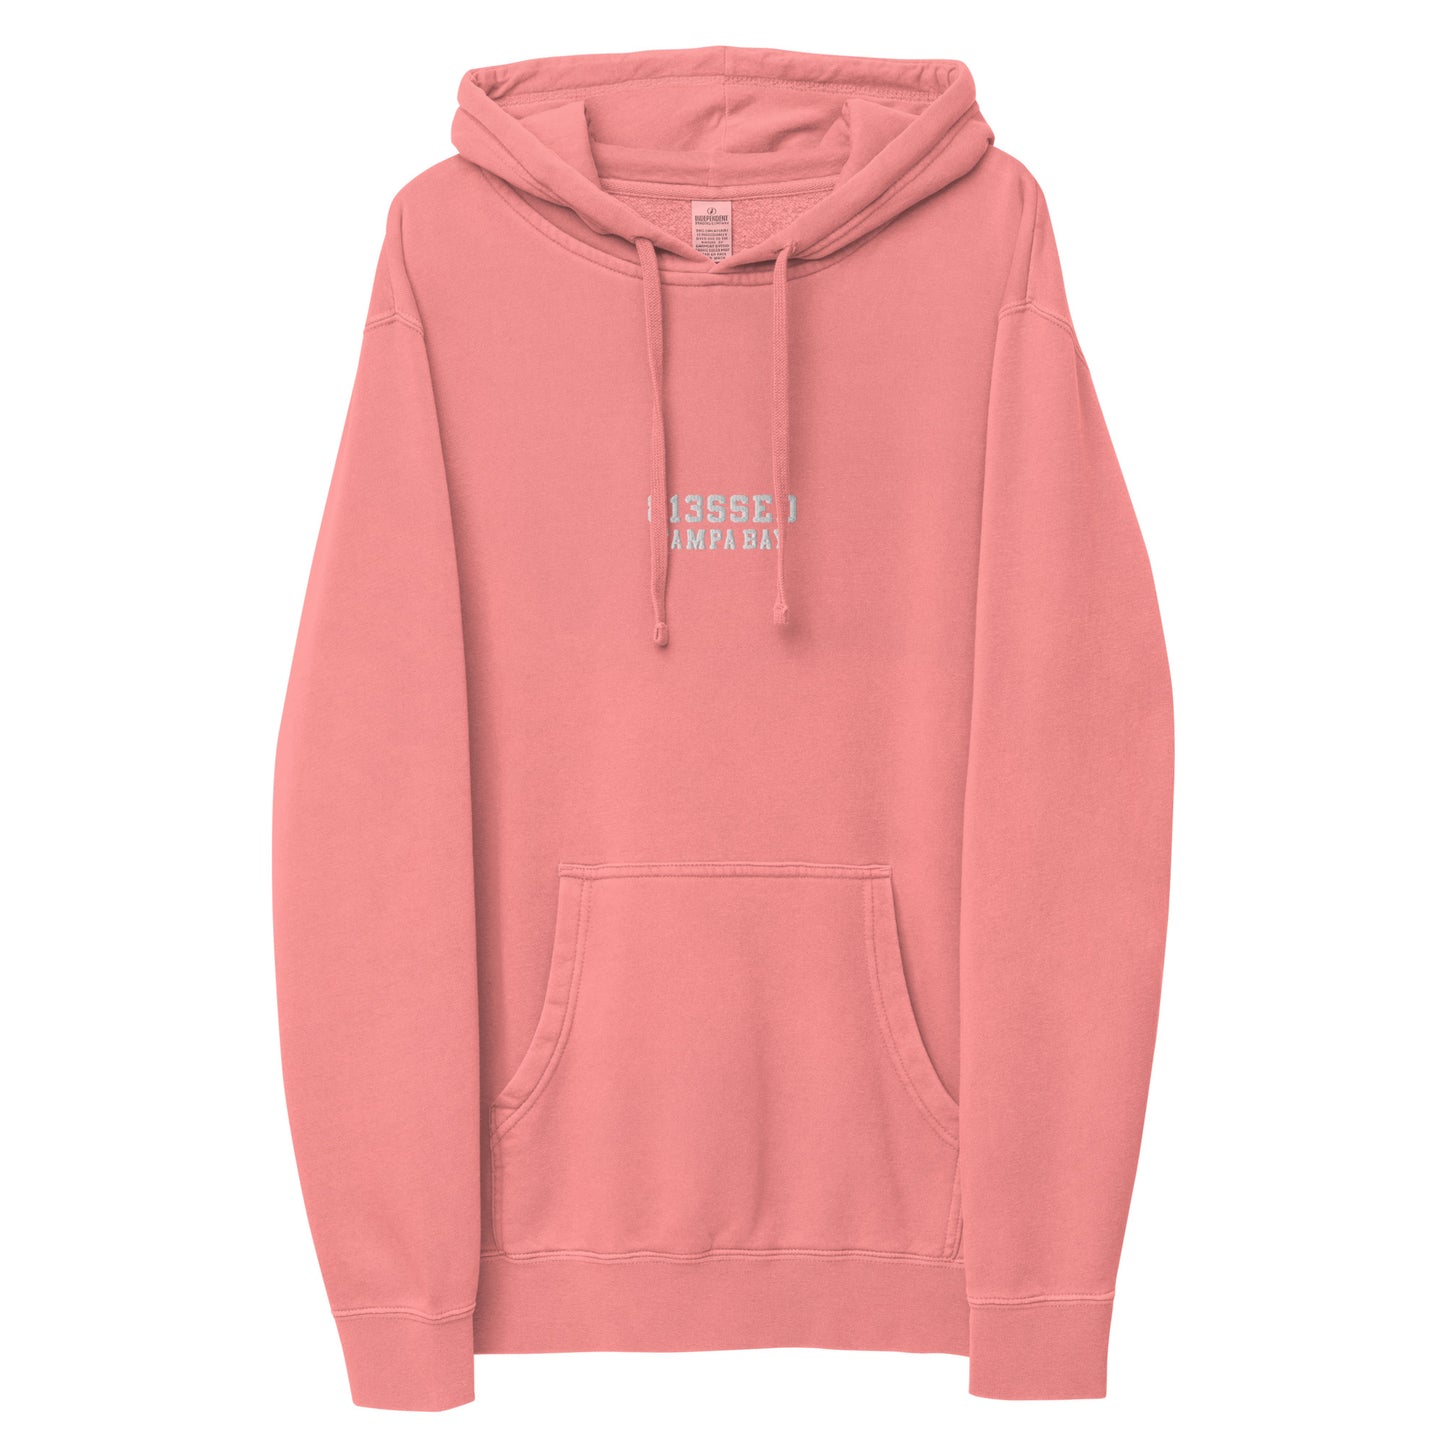 813SSED unisex pigment-dyed hoodie (7 colors)